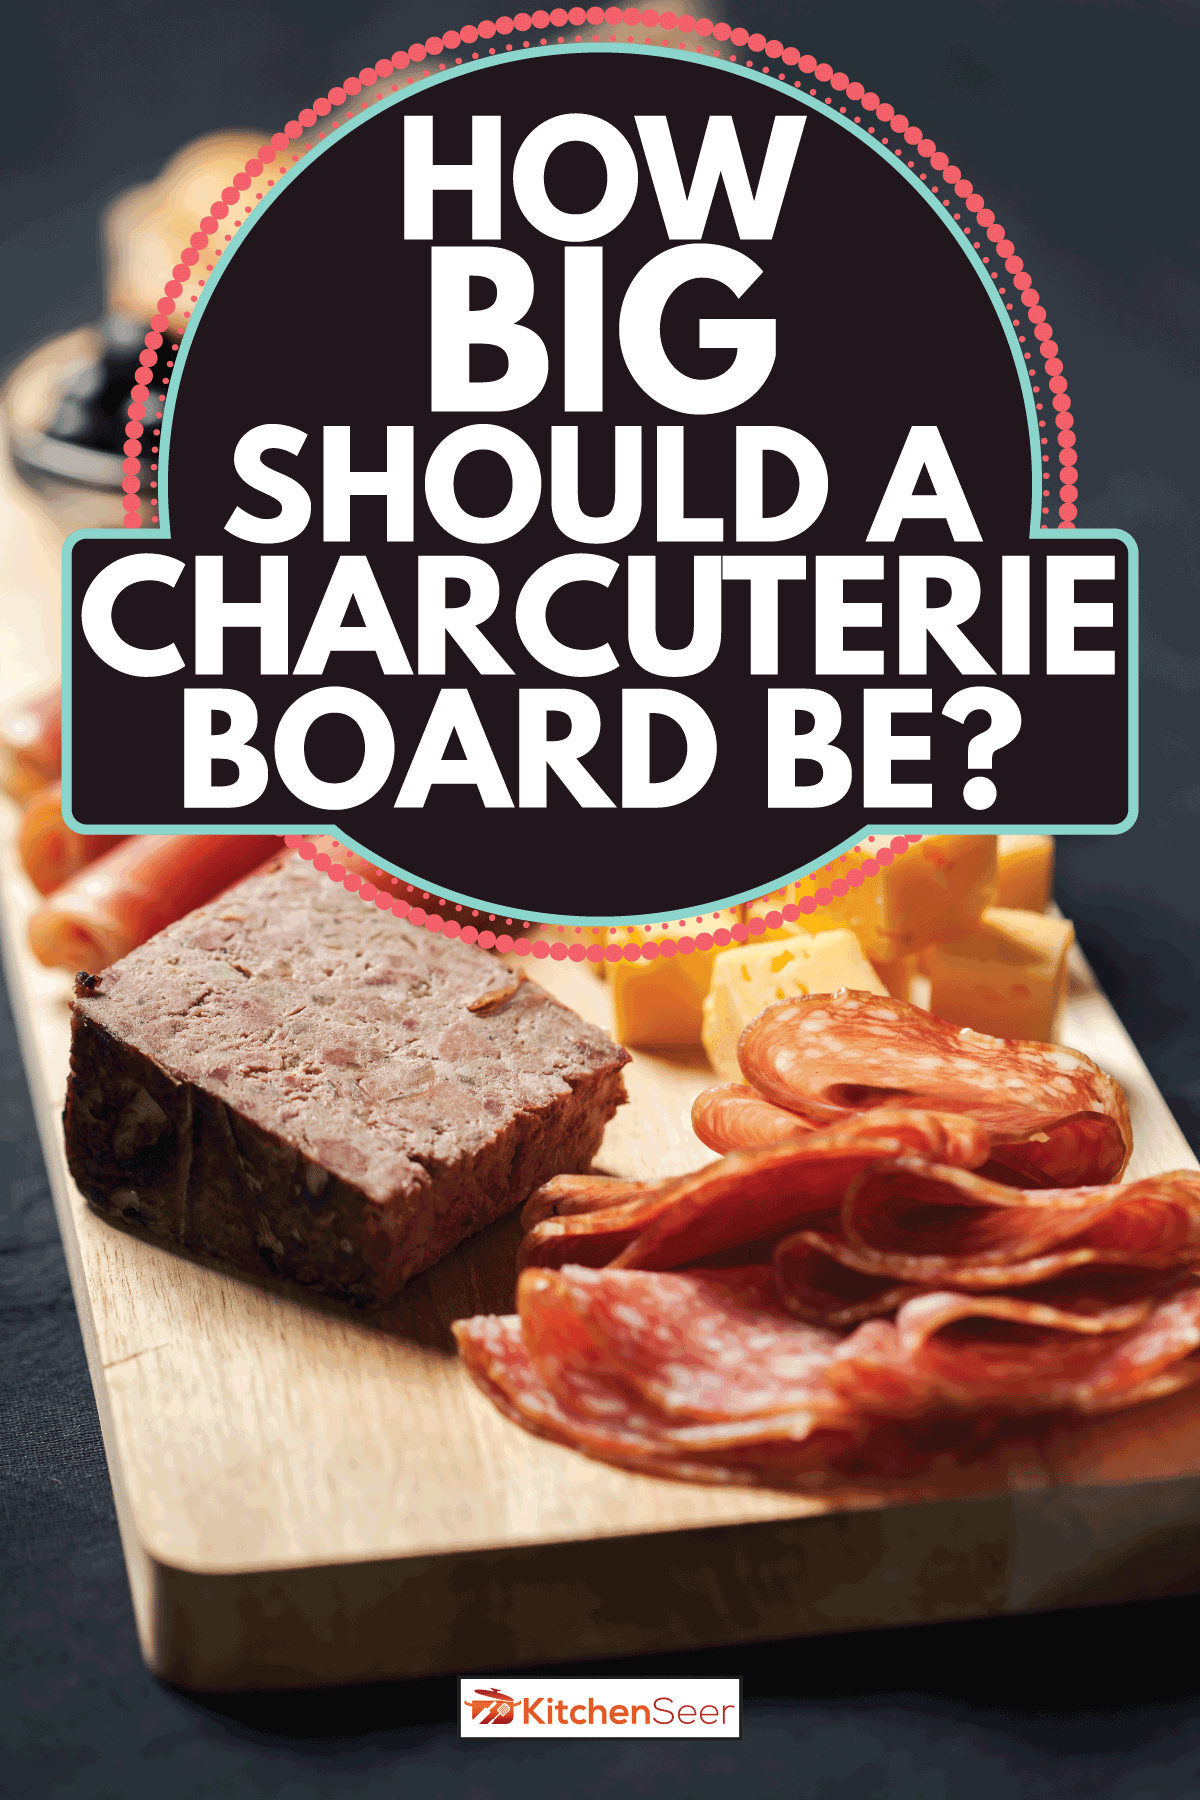 Charcuterie assortment, cheese, olives and gherkins on wooden board. How Big Should A Charcuterie Board Be